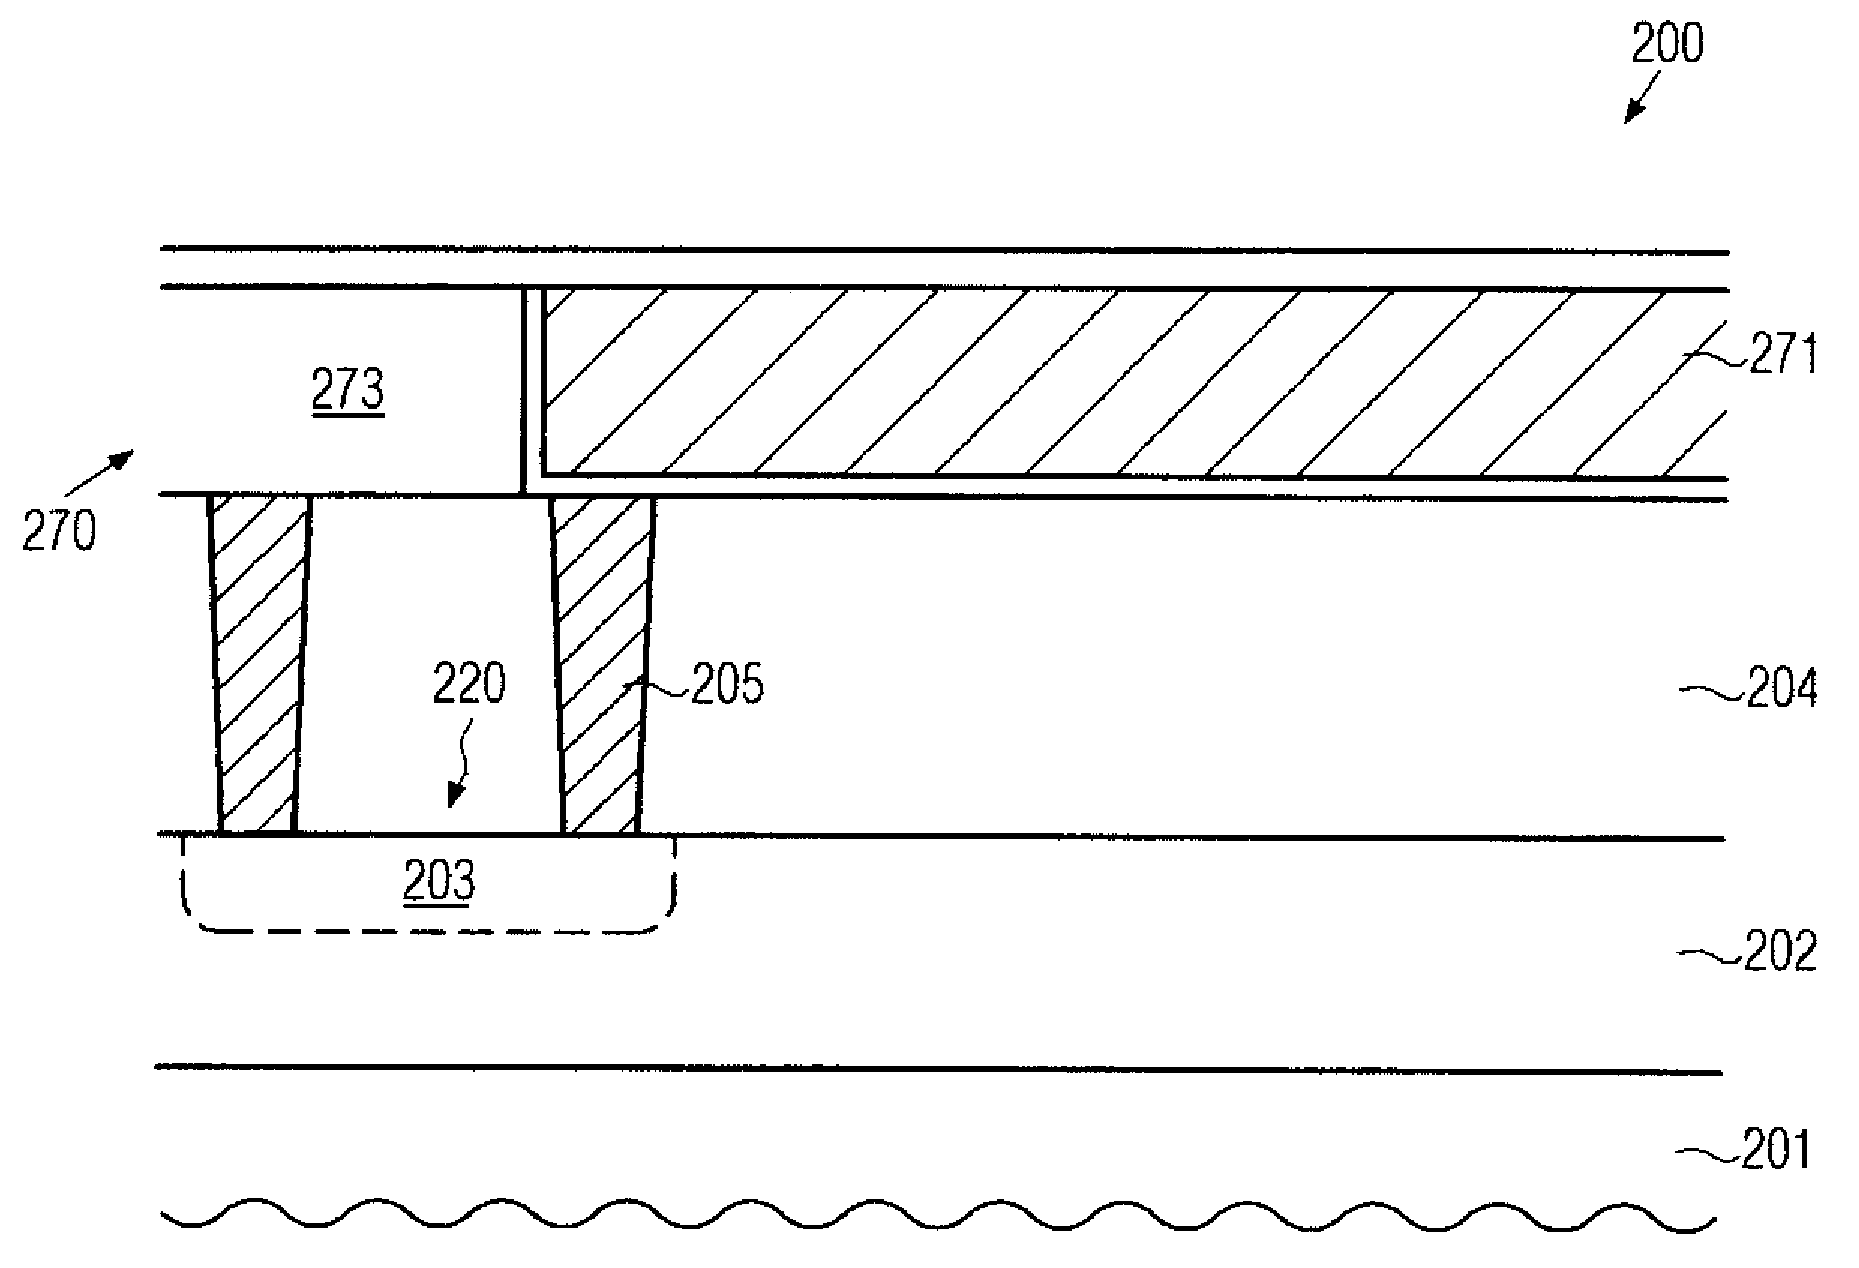 Test structure for opc-related shorts between lines in a semiconductor device